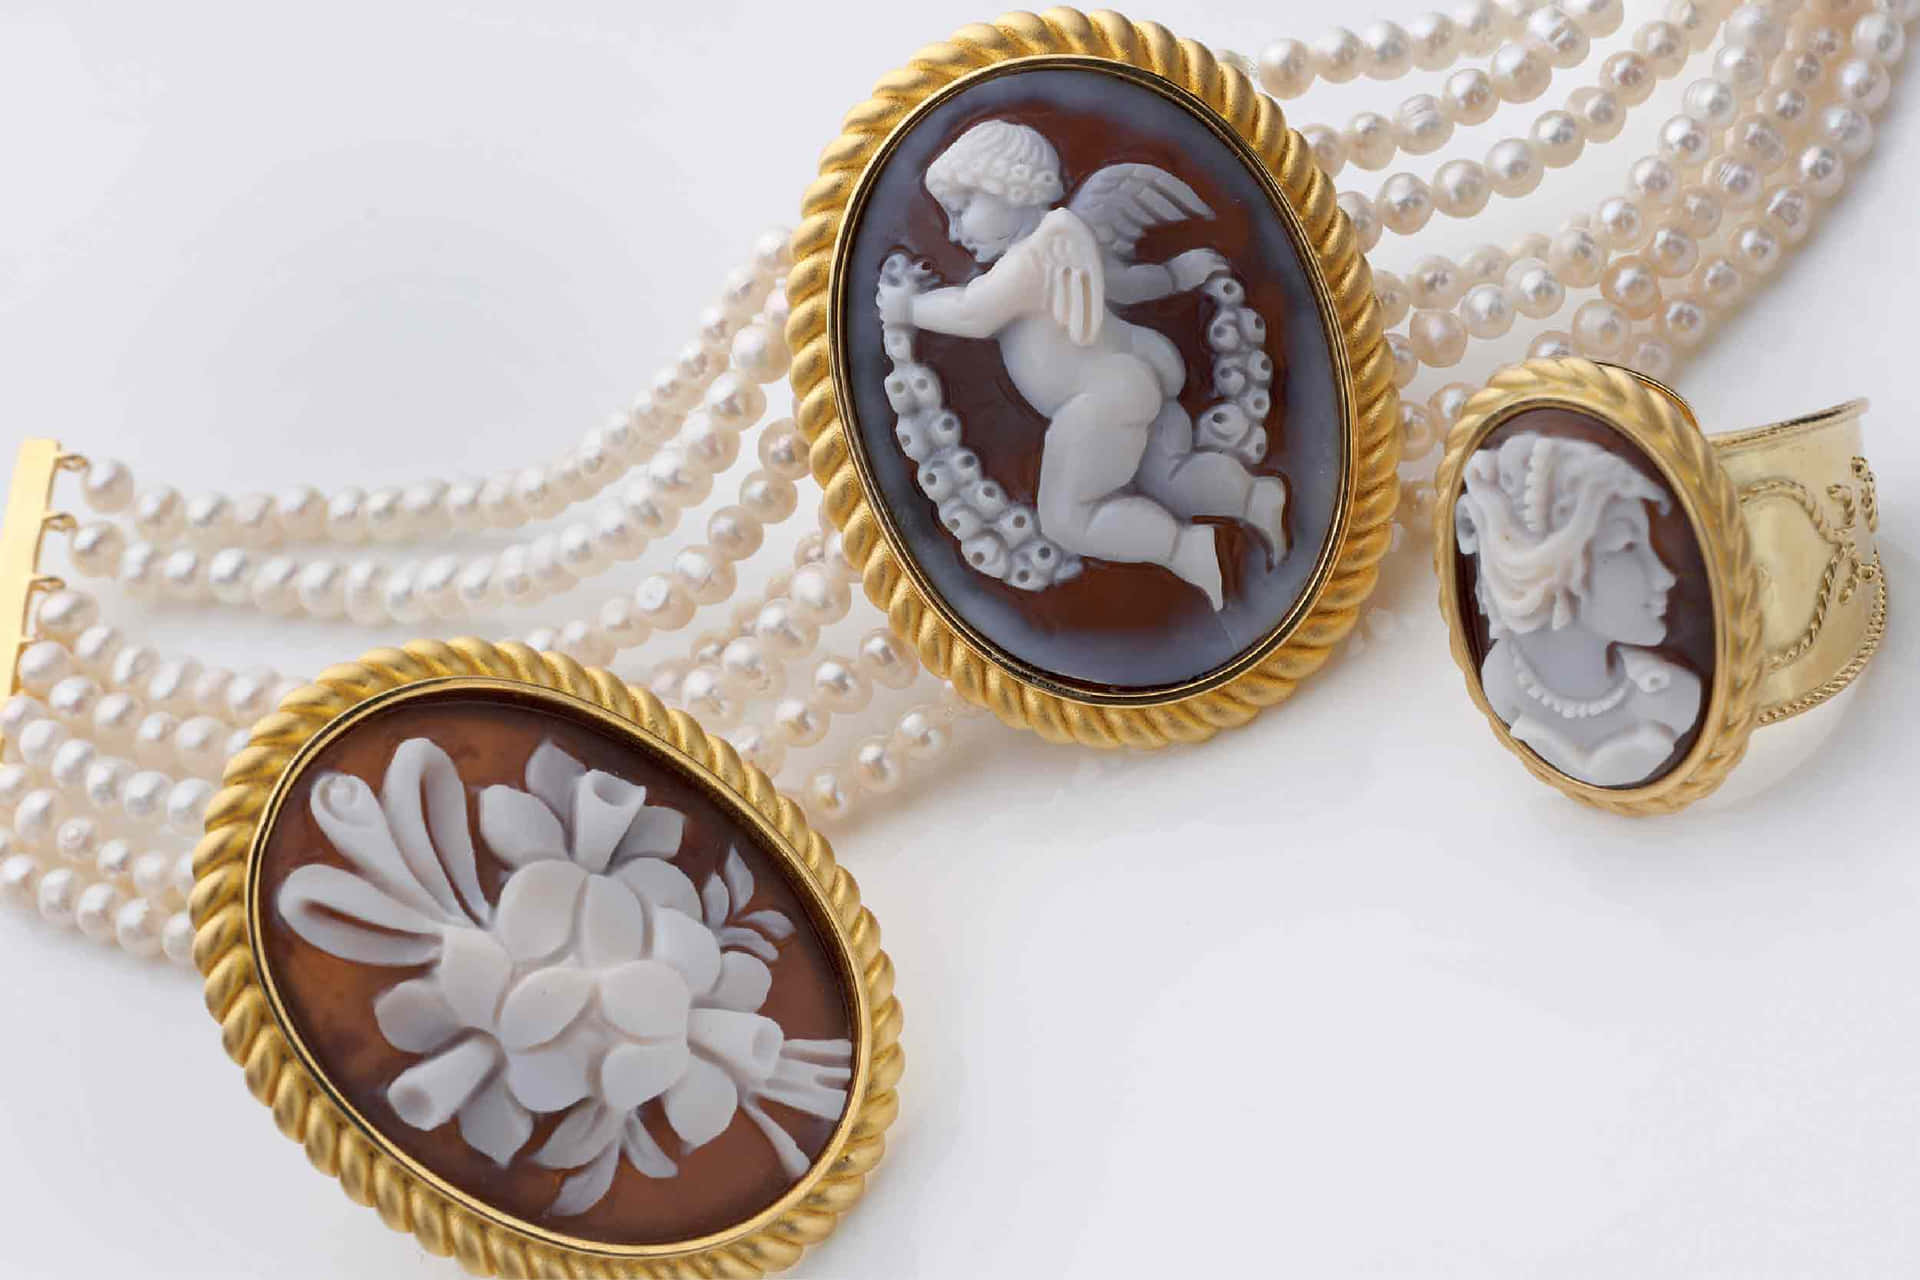 Vintage Cameo Jewelry Collection Wallpaper